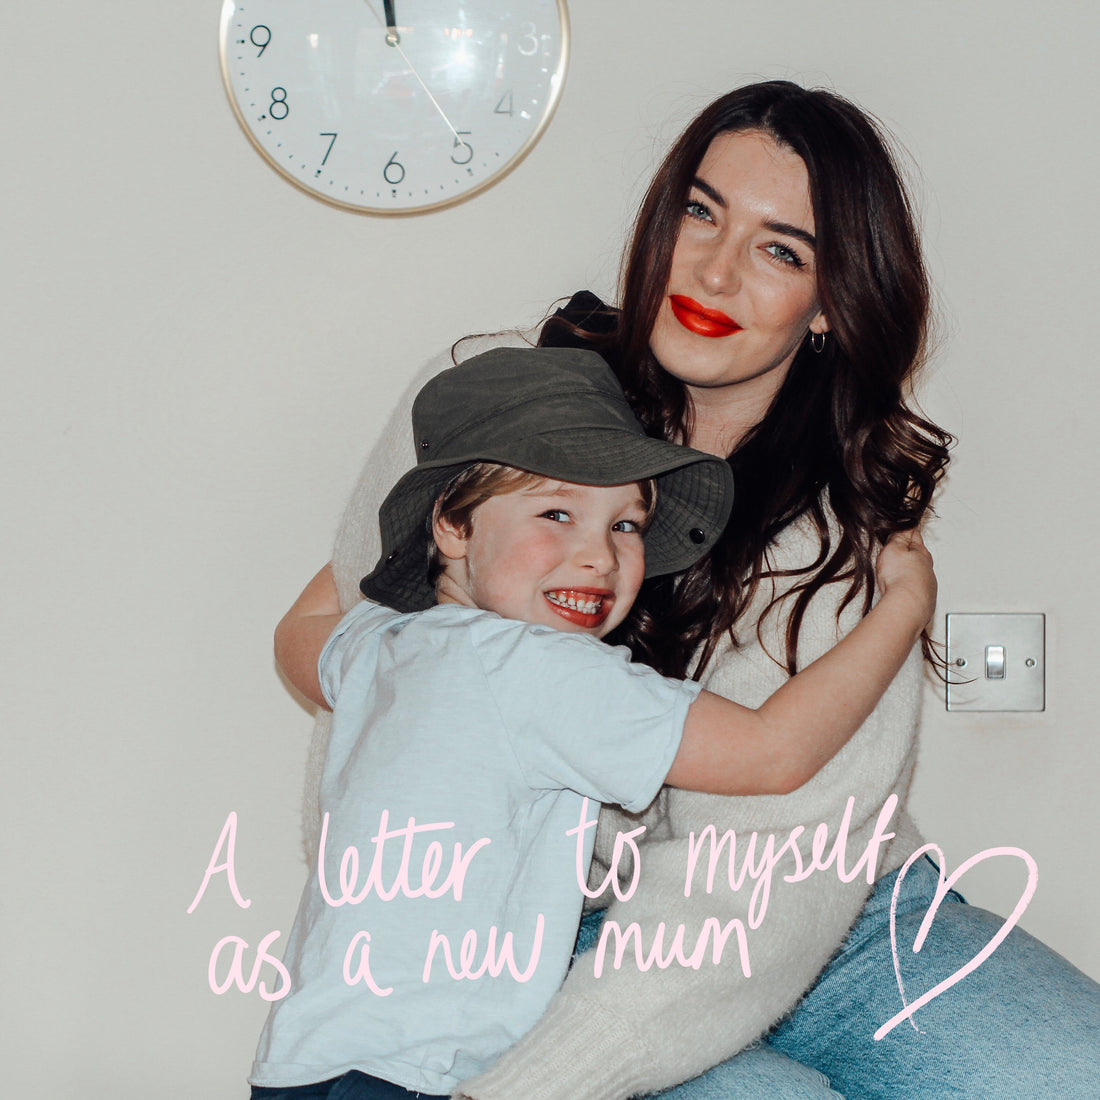 A letter to myself as a new mum